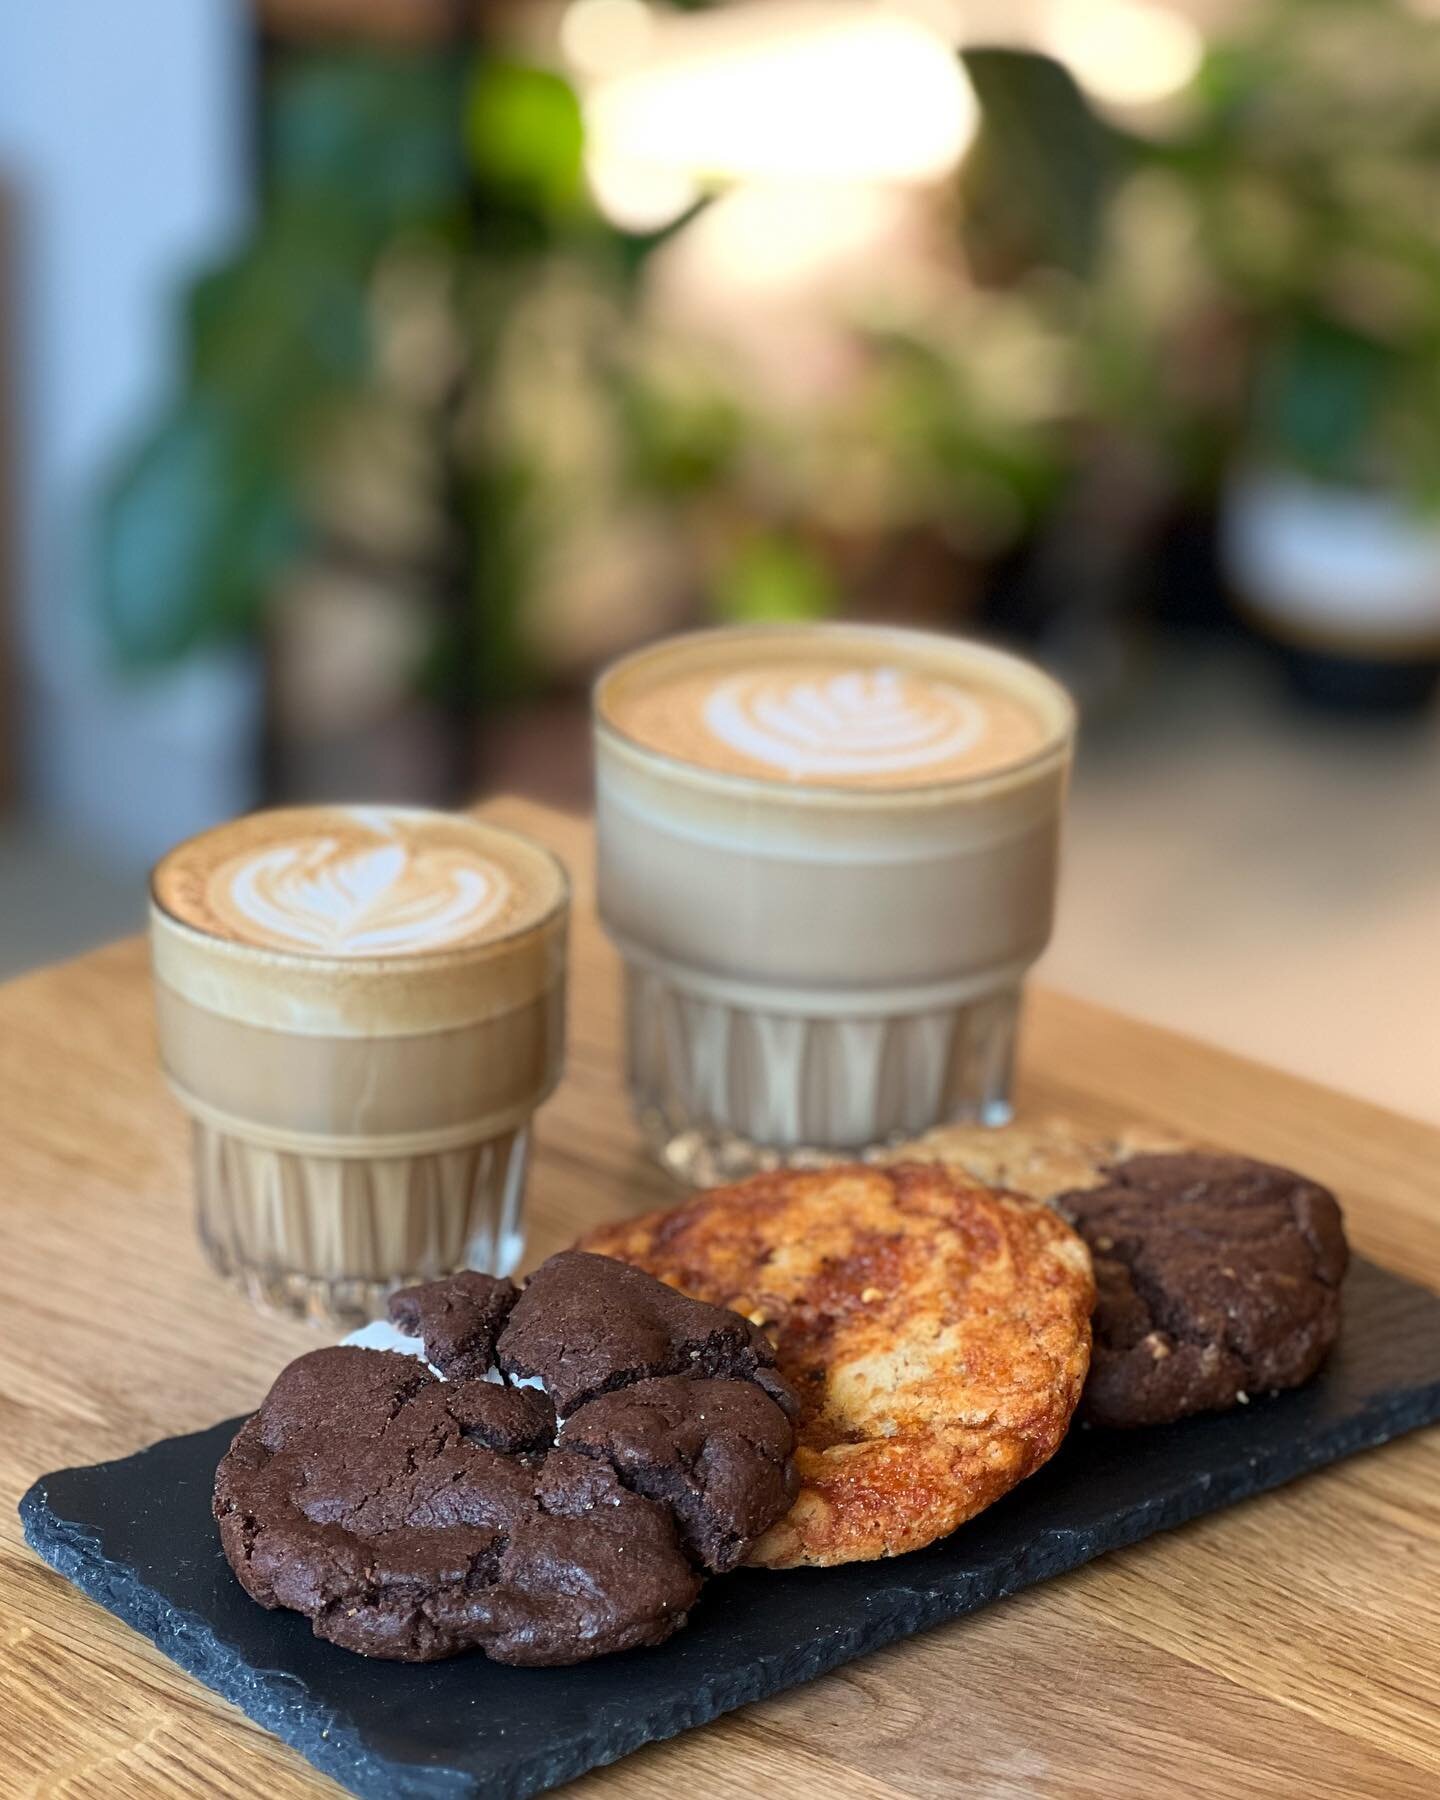 Join us tomorrow for our first ever stat holiday opening! 🎉

We&rsquo;ve got 17 bakery options for you to choose from and 3 extra special espressos from @nemesis.coffee @agroroasters @batwcoffee and let&rsquo;s not forget the new guest filter coffee